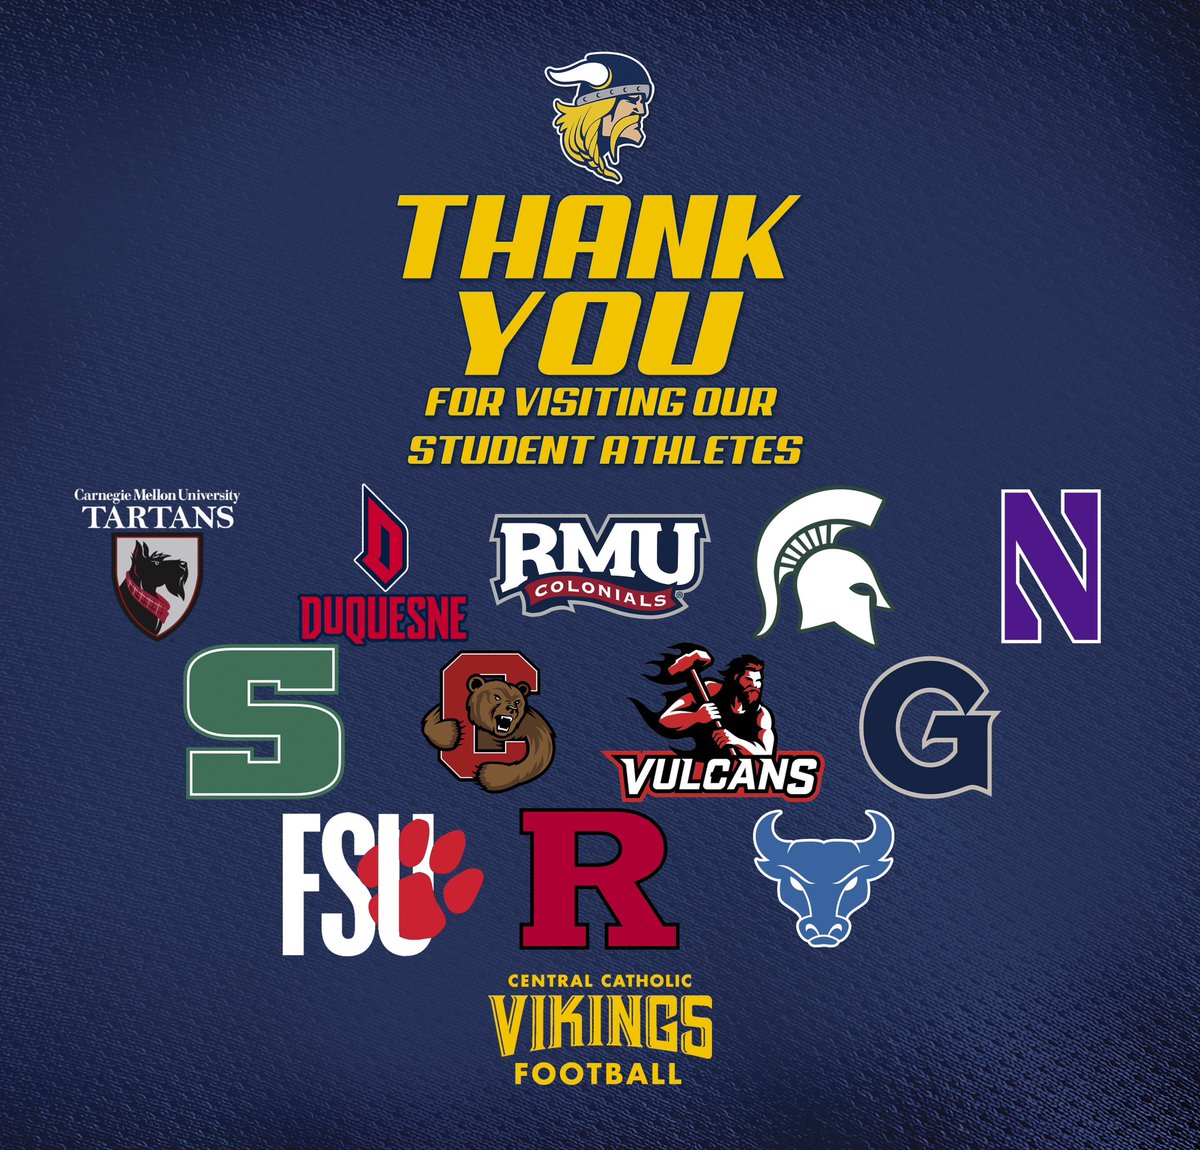 Thanks for stopping by @PCC_FOOTBALL and recruiting our Student Athletes today! #RollVikes #MenofCentral